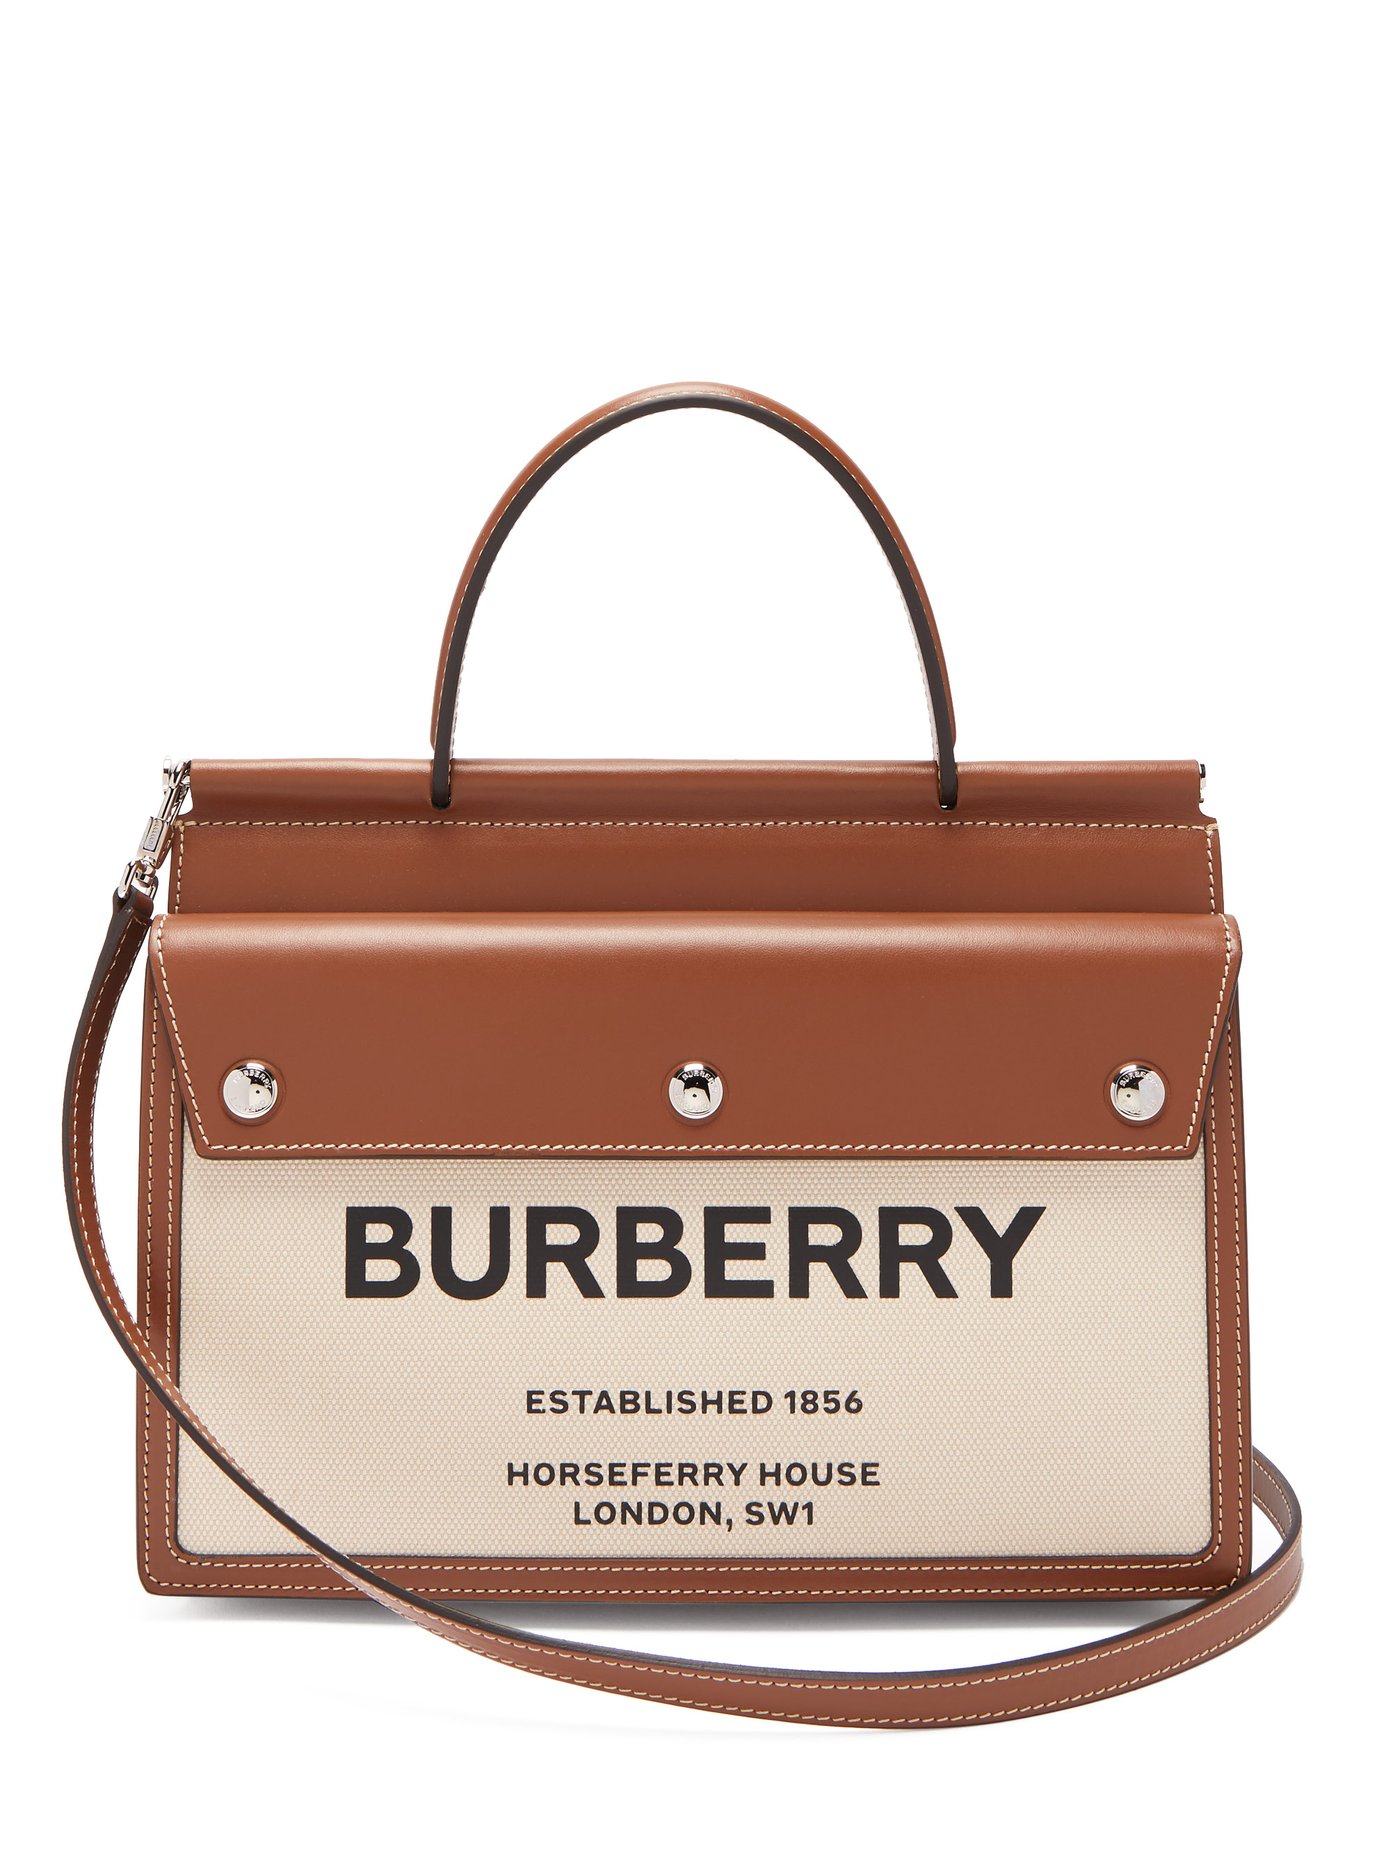 burberry title